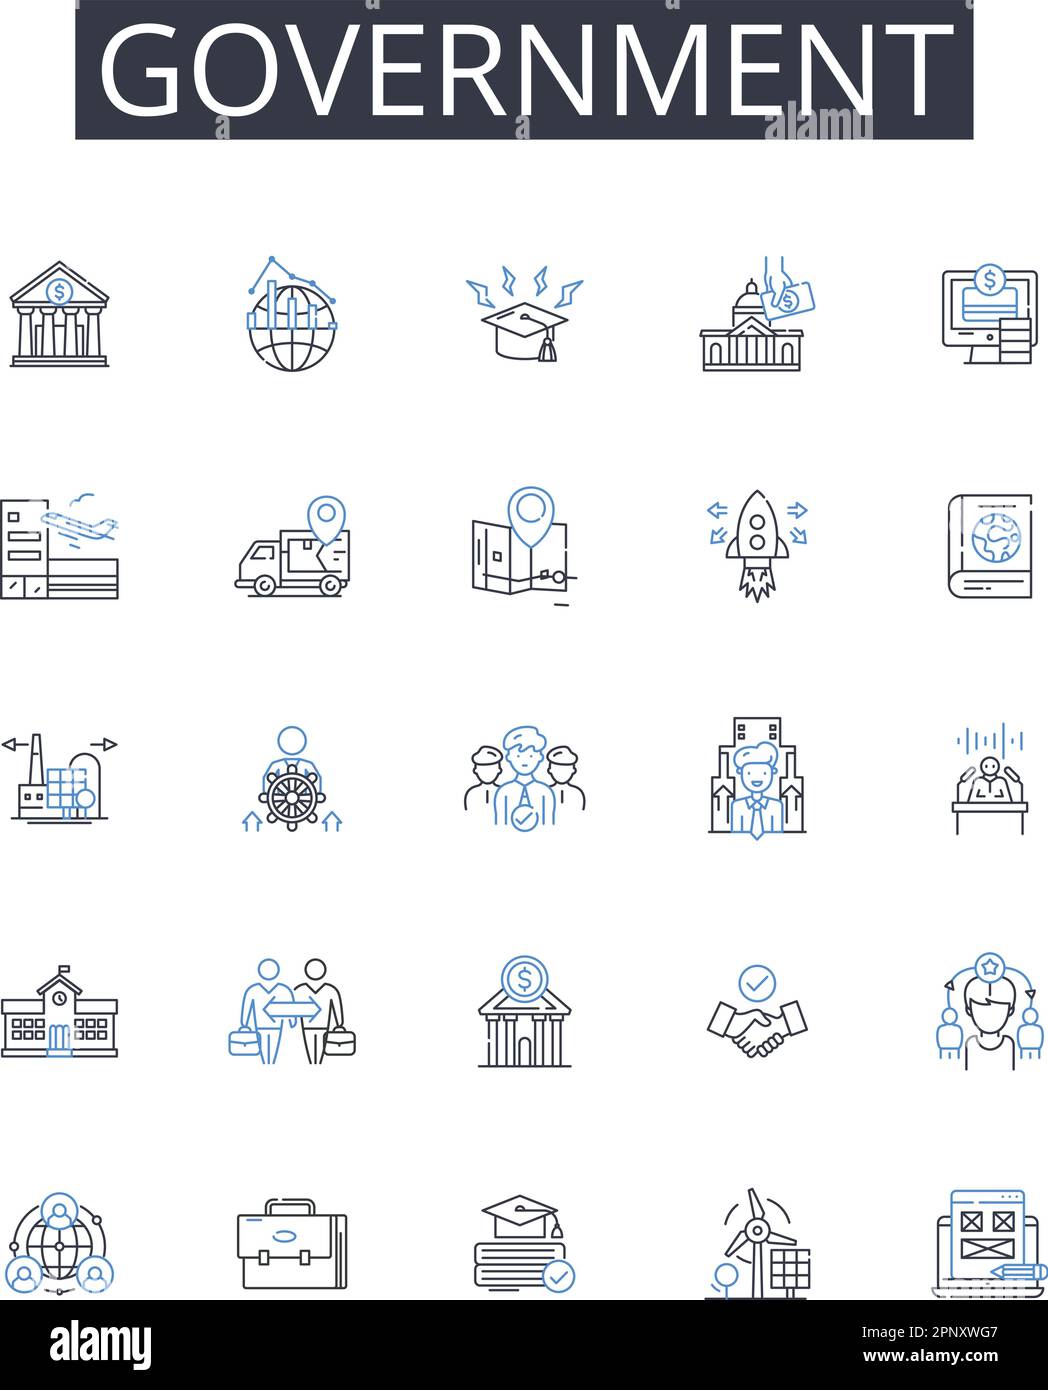 Government line icons collection. Authority Power, State Regime, Administration Management, Governance Direction, Regulator Overseer, Regime Rule Stock Vector